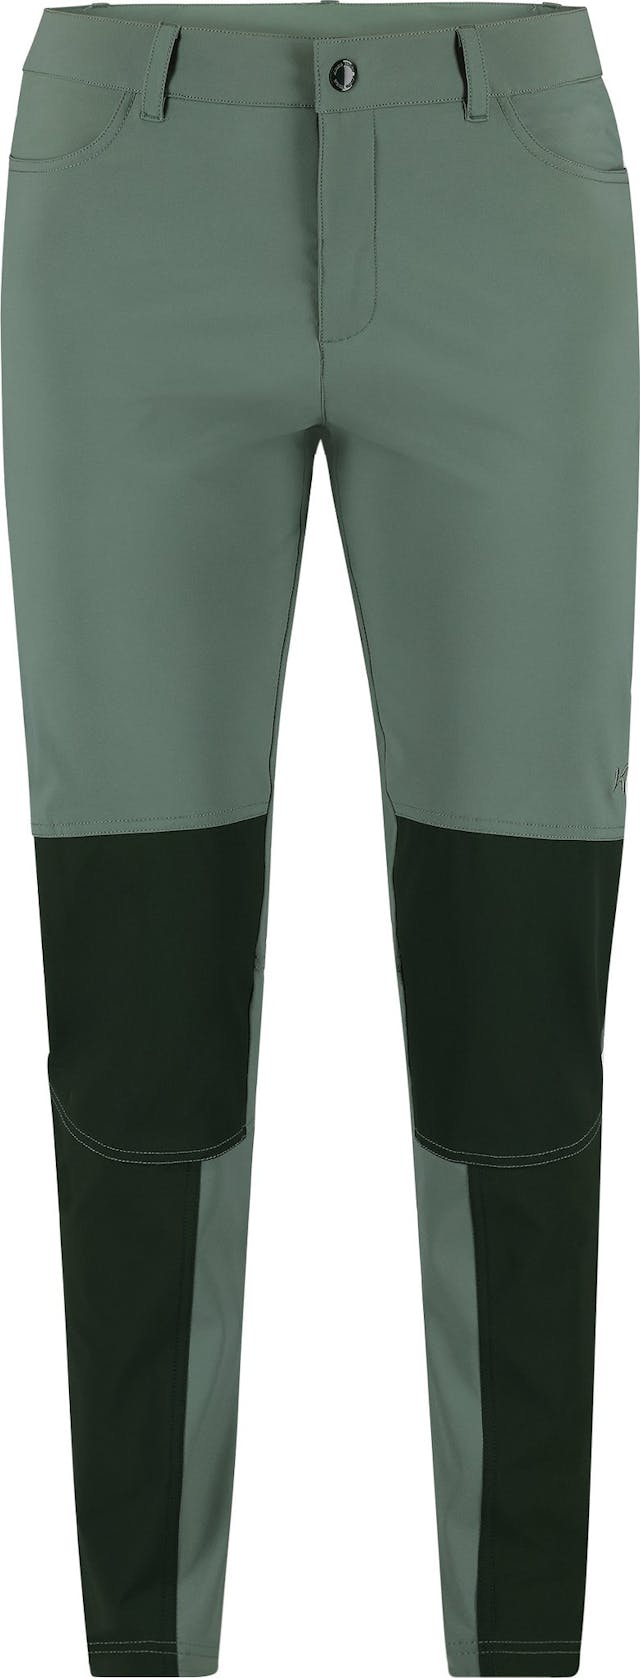 Product image for Thale Hiking Pants - Women's